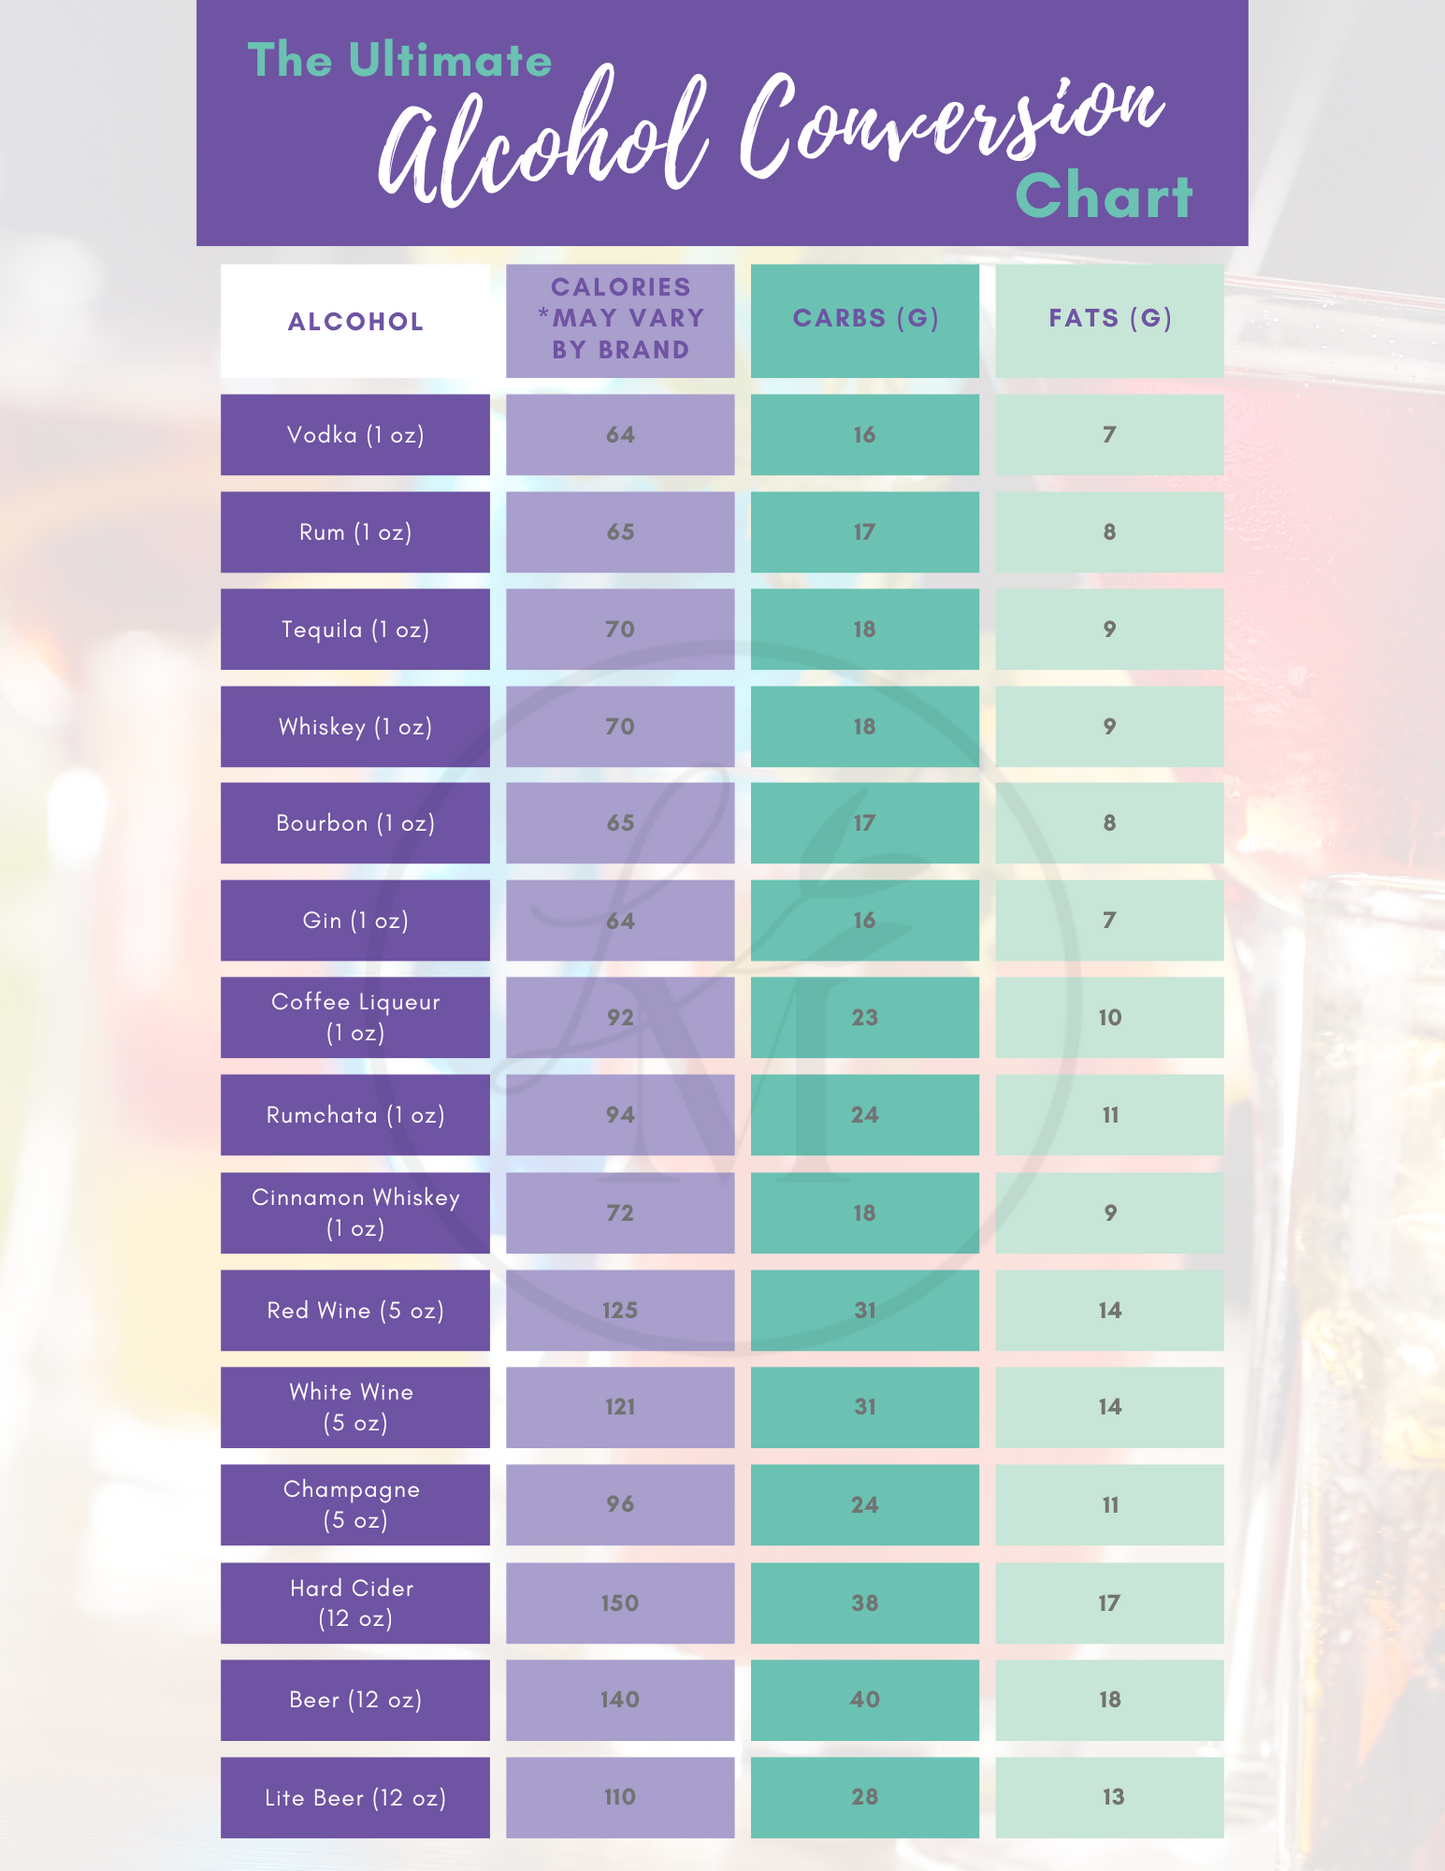 The Ultimate Alcohol Macro Conversion Chart